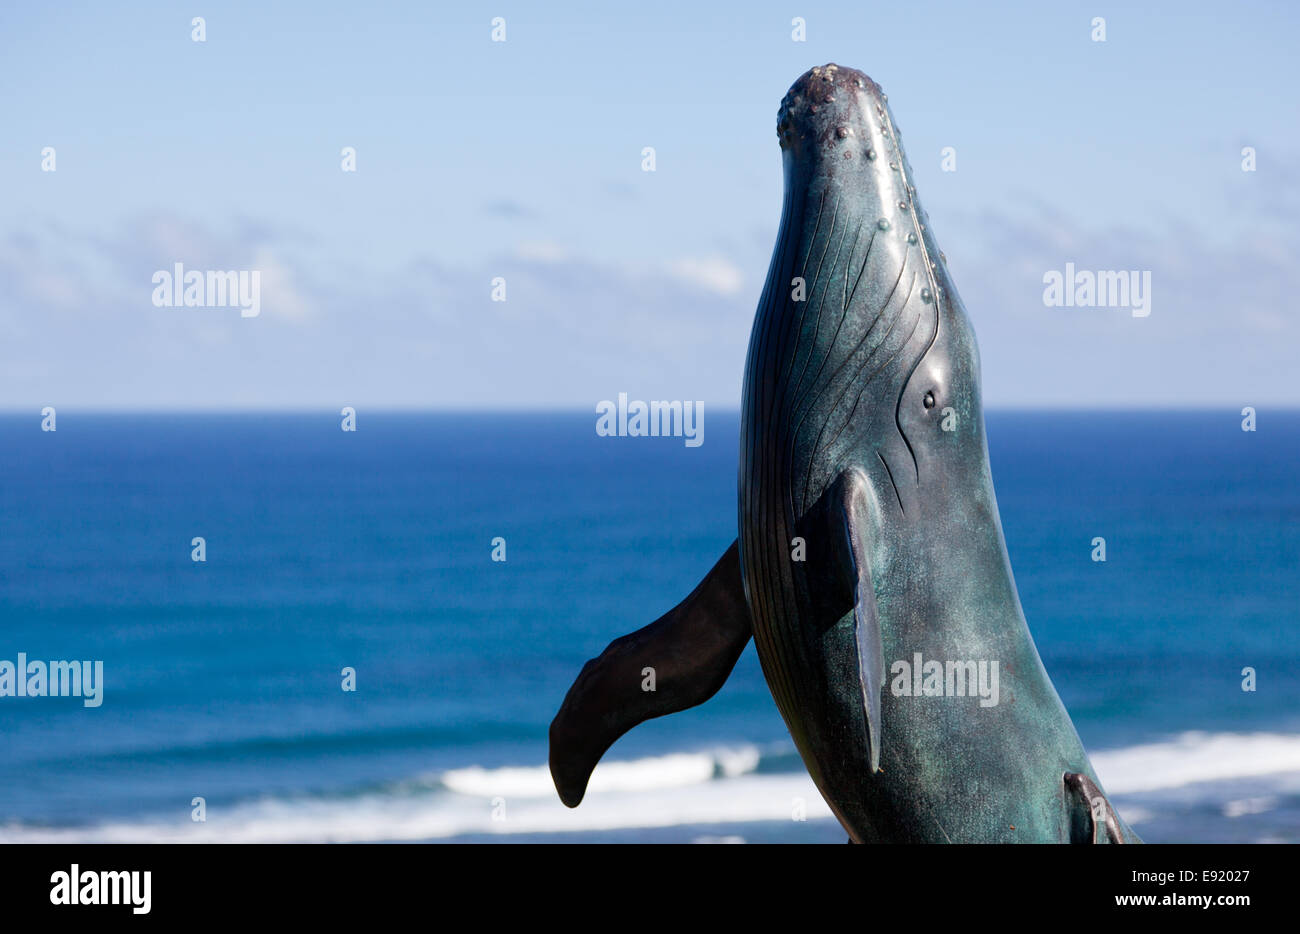 Statue of whale breaching with sea Stock Photo